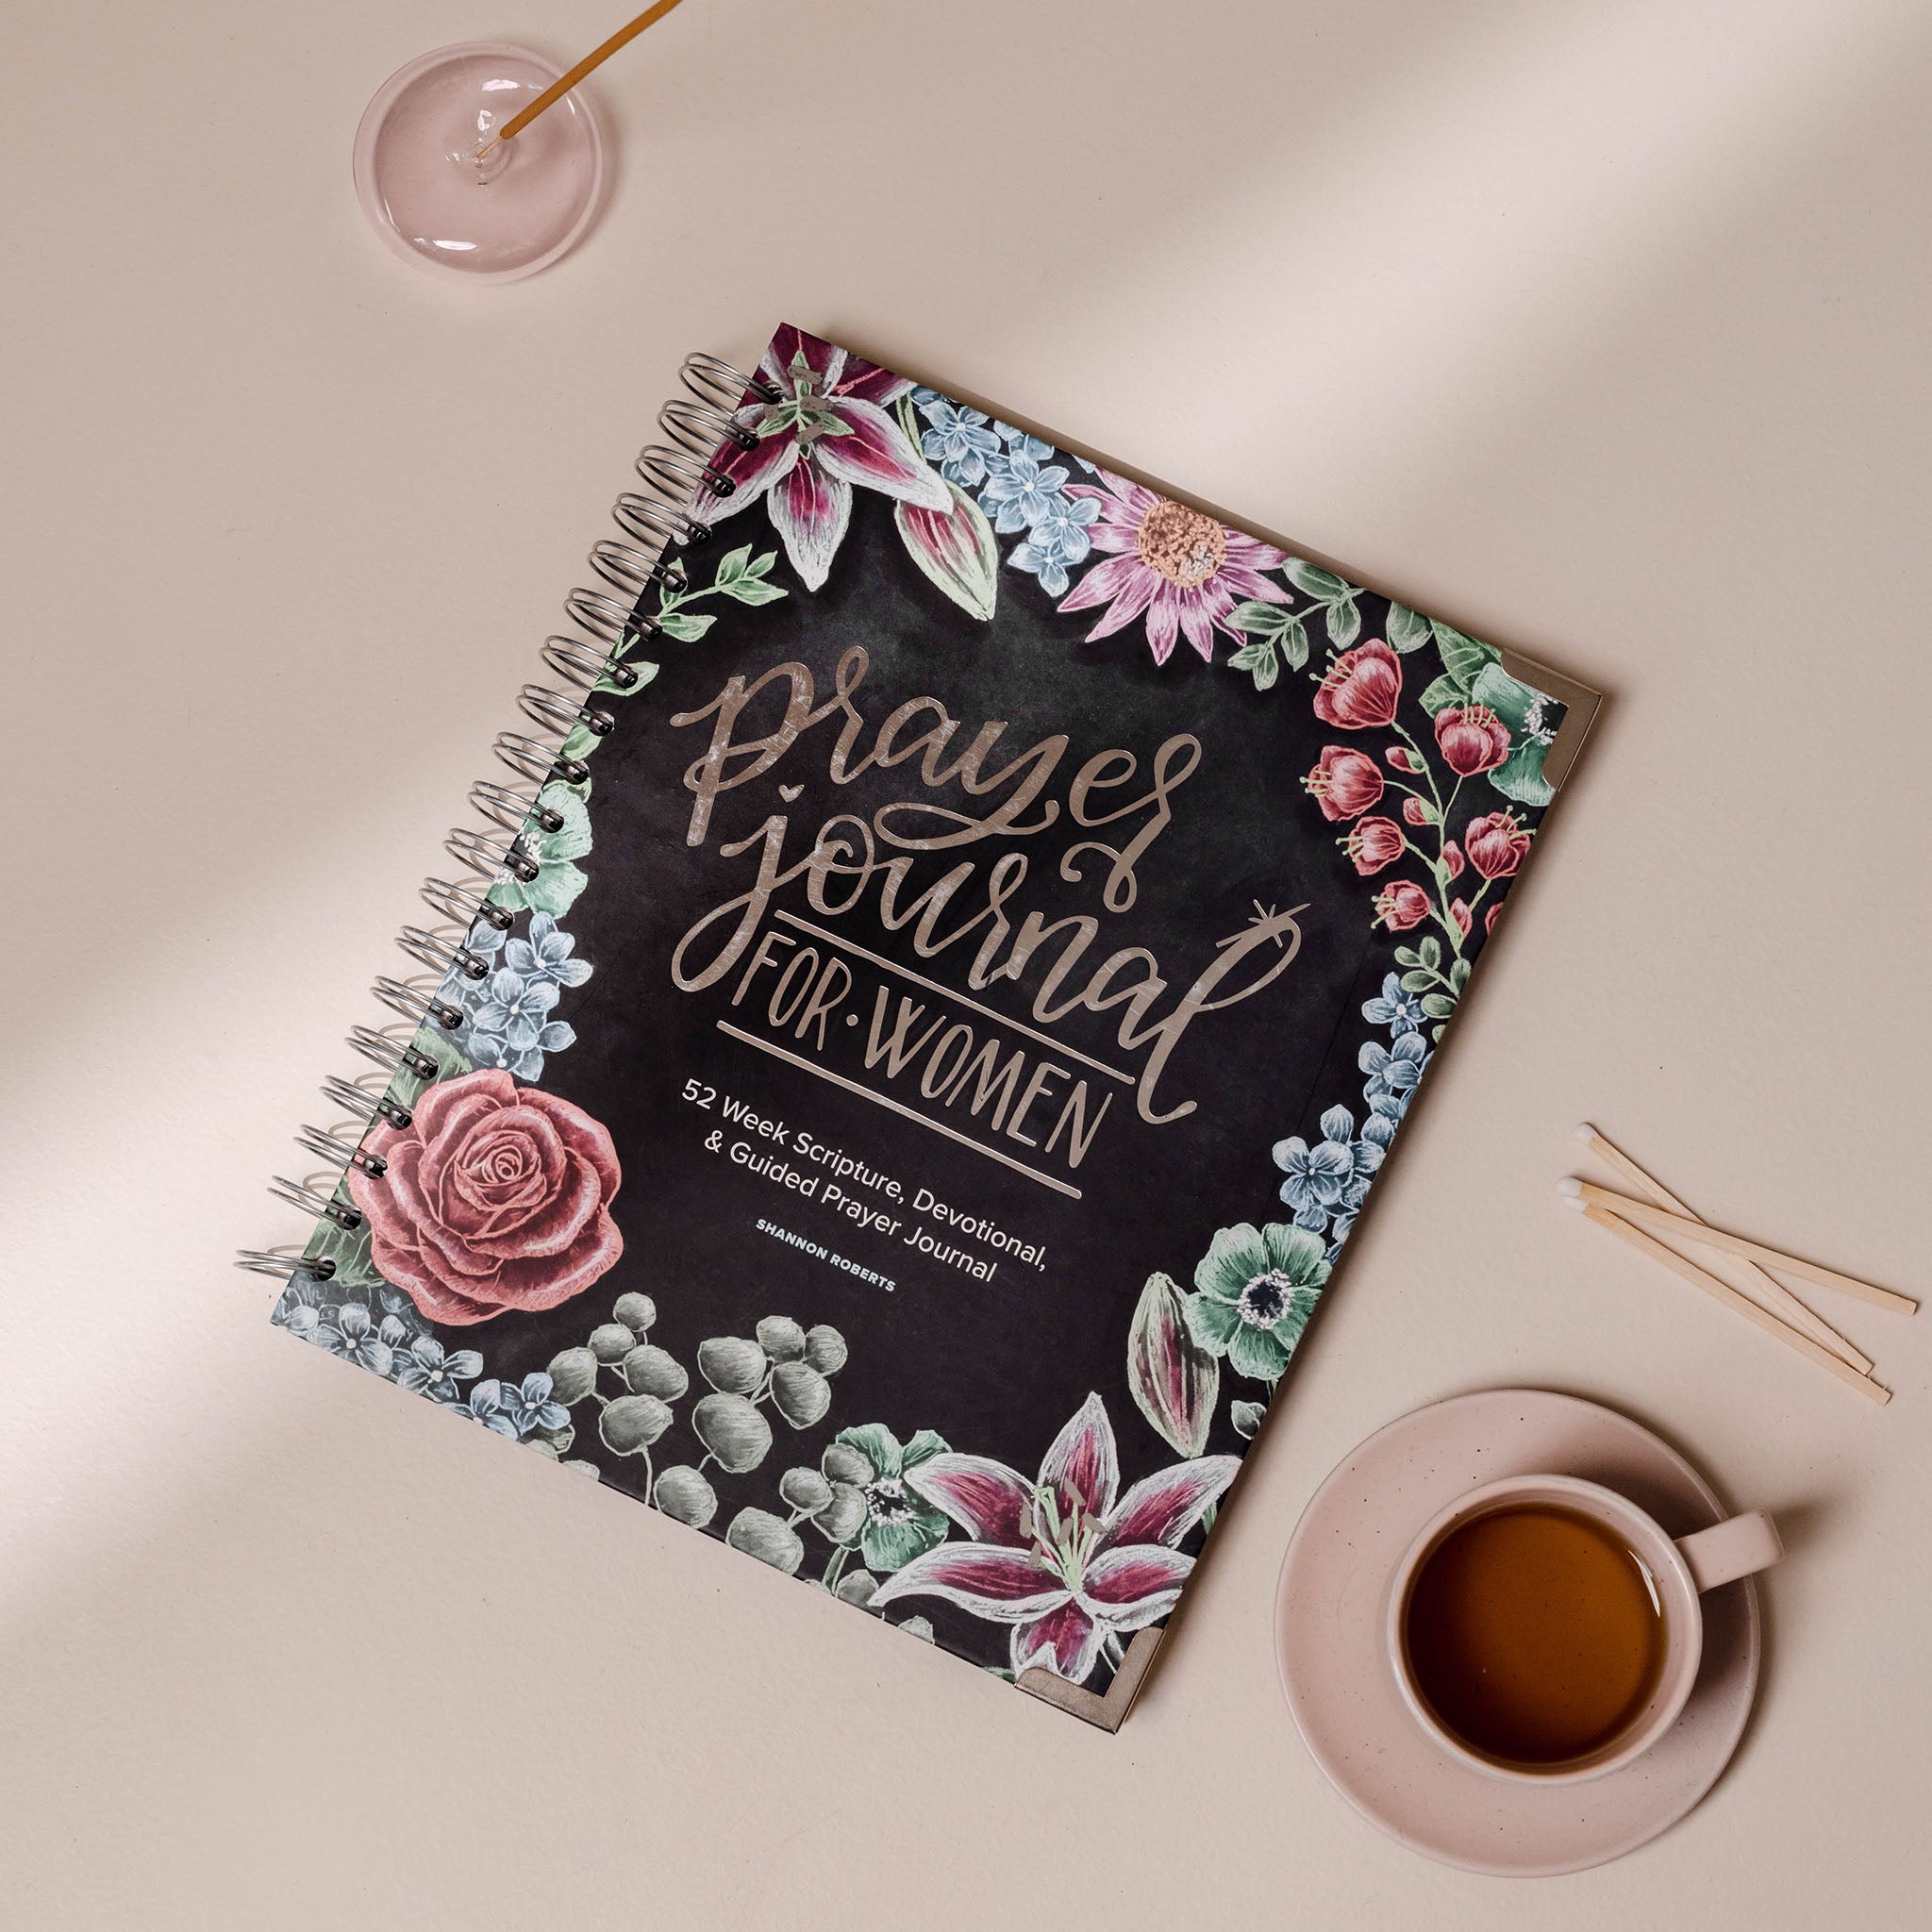 52 Weeks of Bible Verse Journaling for Women: A Scripture Journey for Women